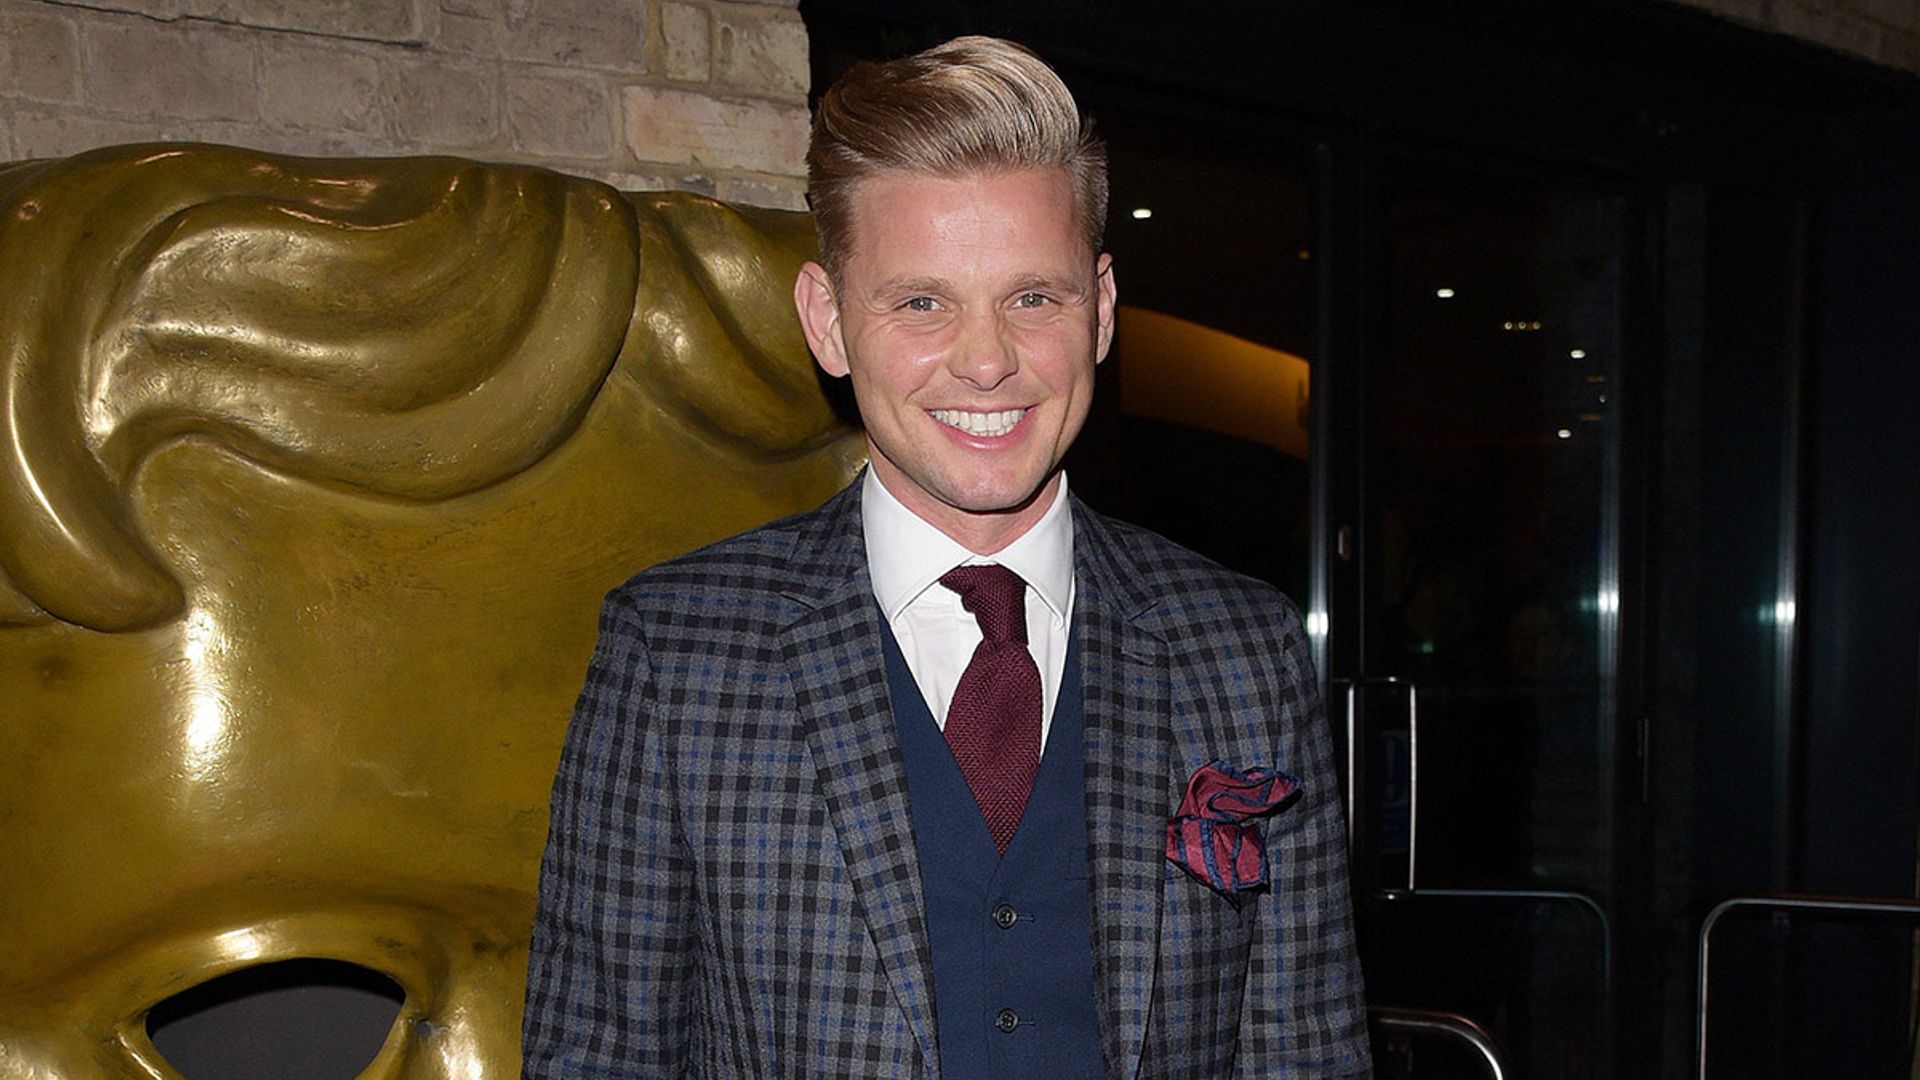 Jeff Brazier reveals son Freddy's exciting new career – details